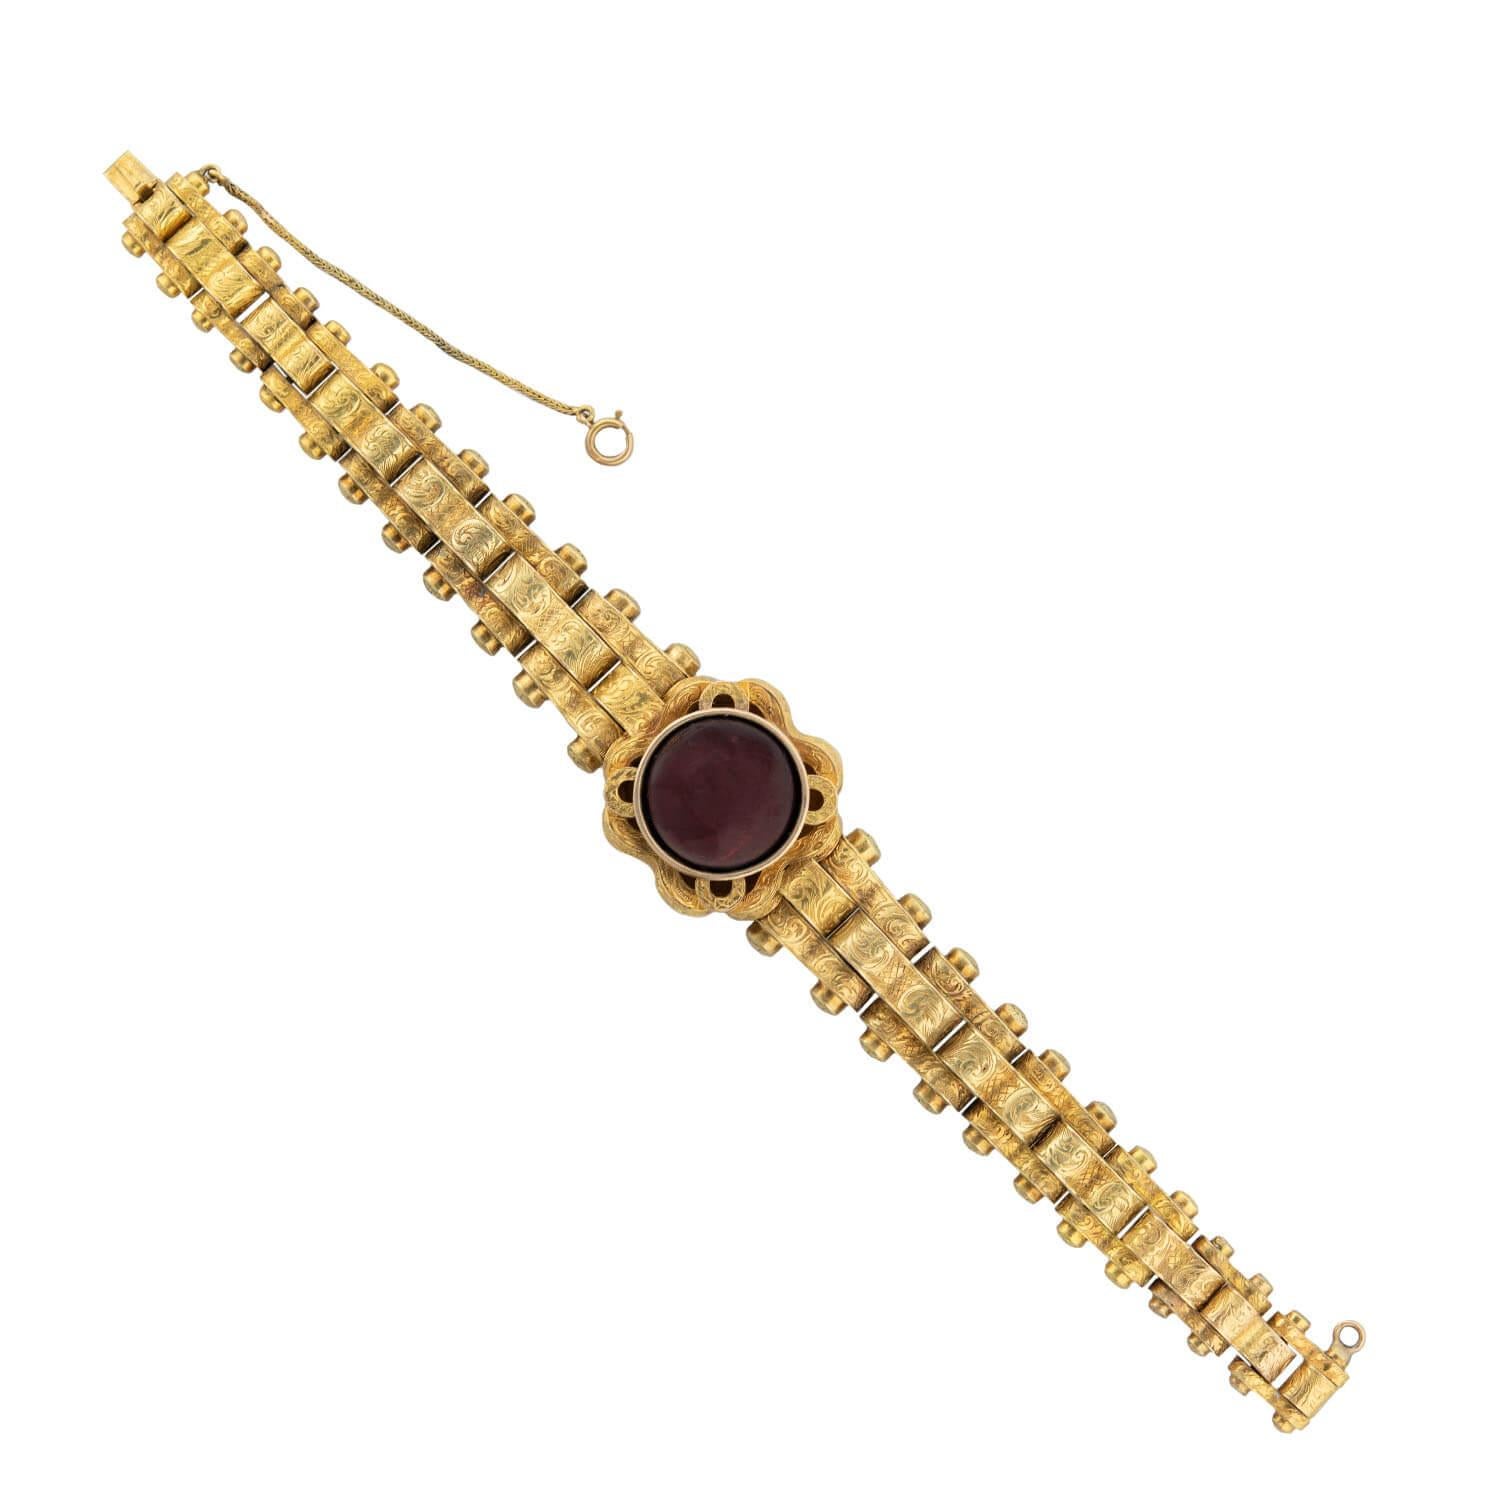 A stunning and artistic bracelet from the Victorian (ca1880) era! This jaw-dropping piece is crafted in 15k yellow gold and is comprised of a series of articulated bike chain-style links. The centerpiece of the bracelet features a large deep red